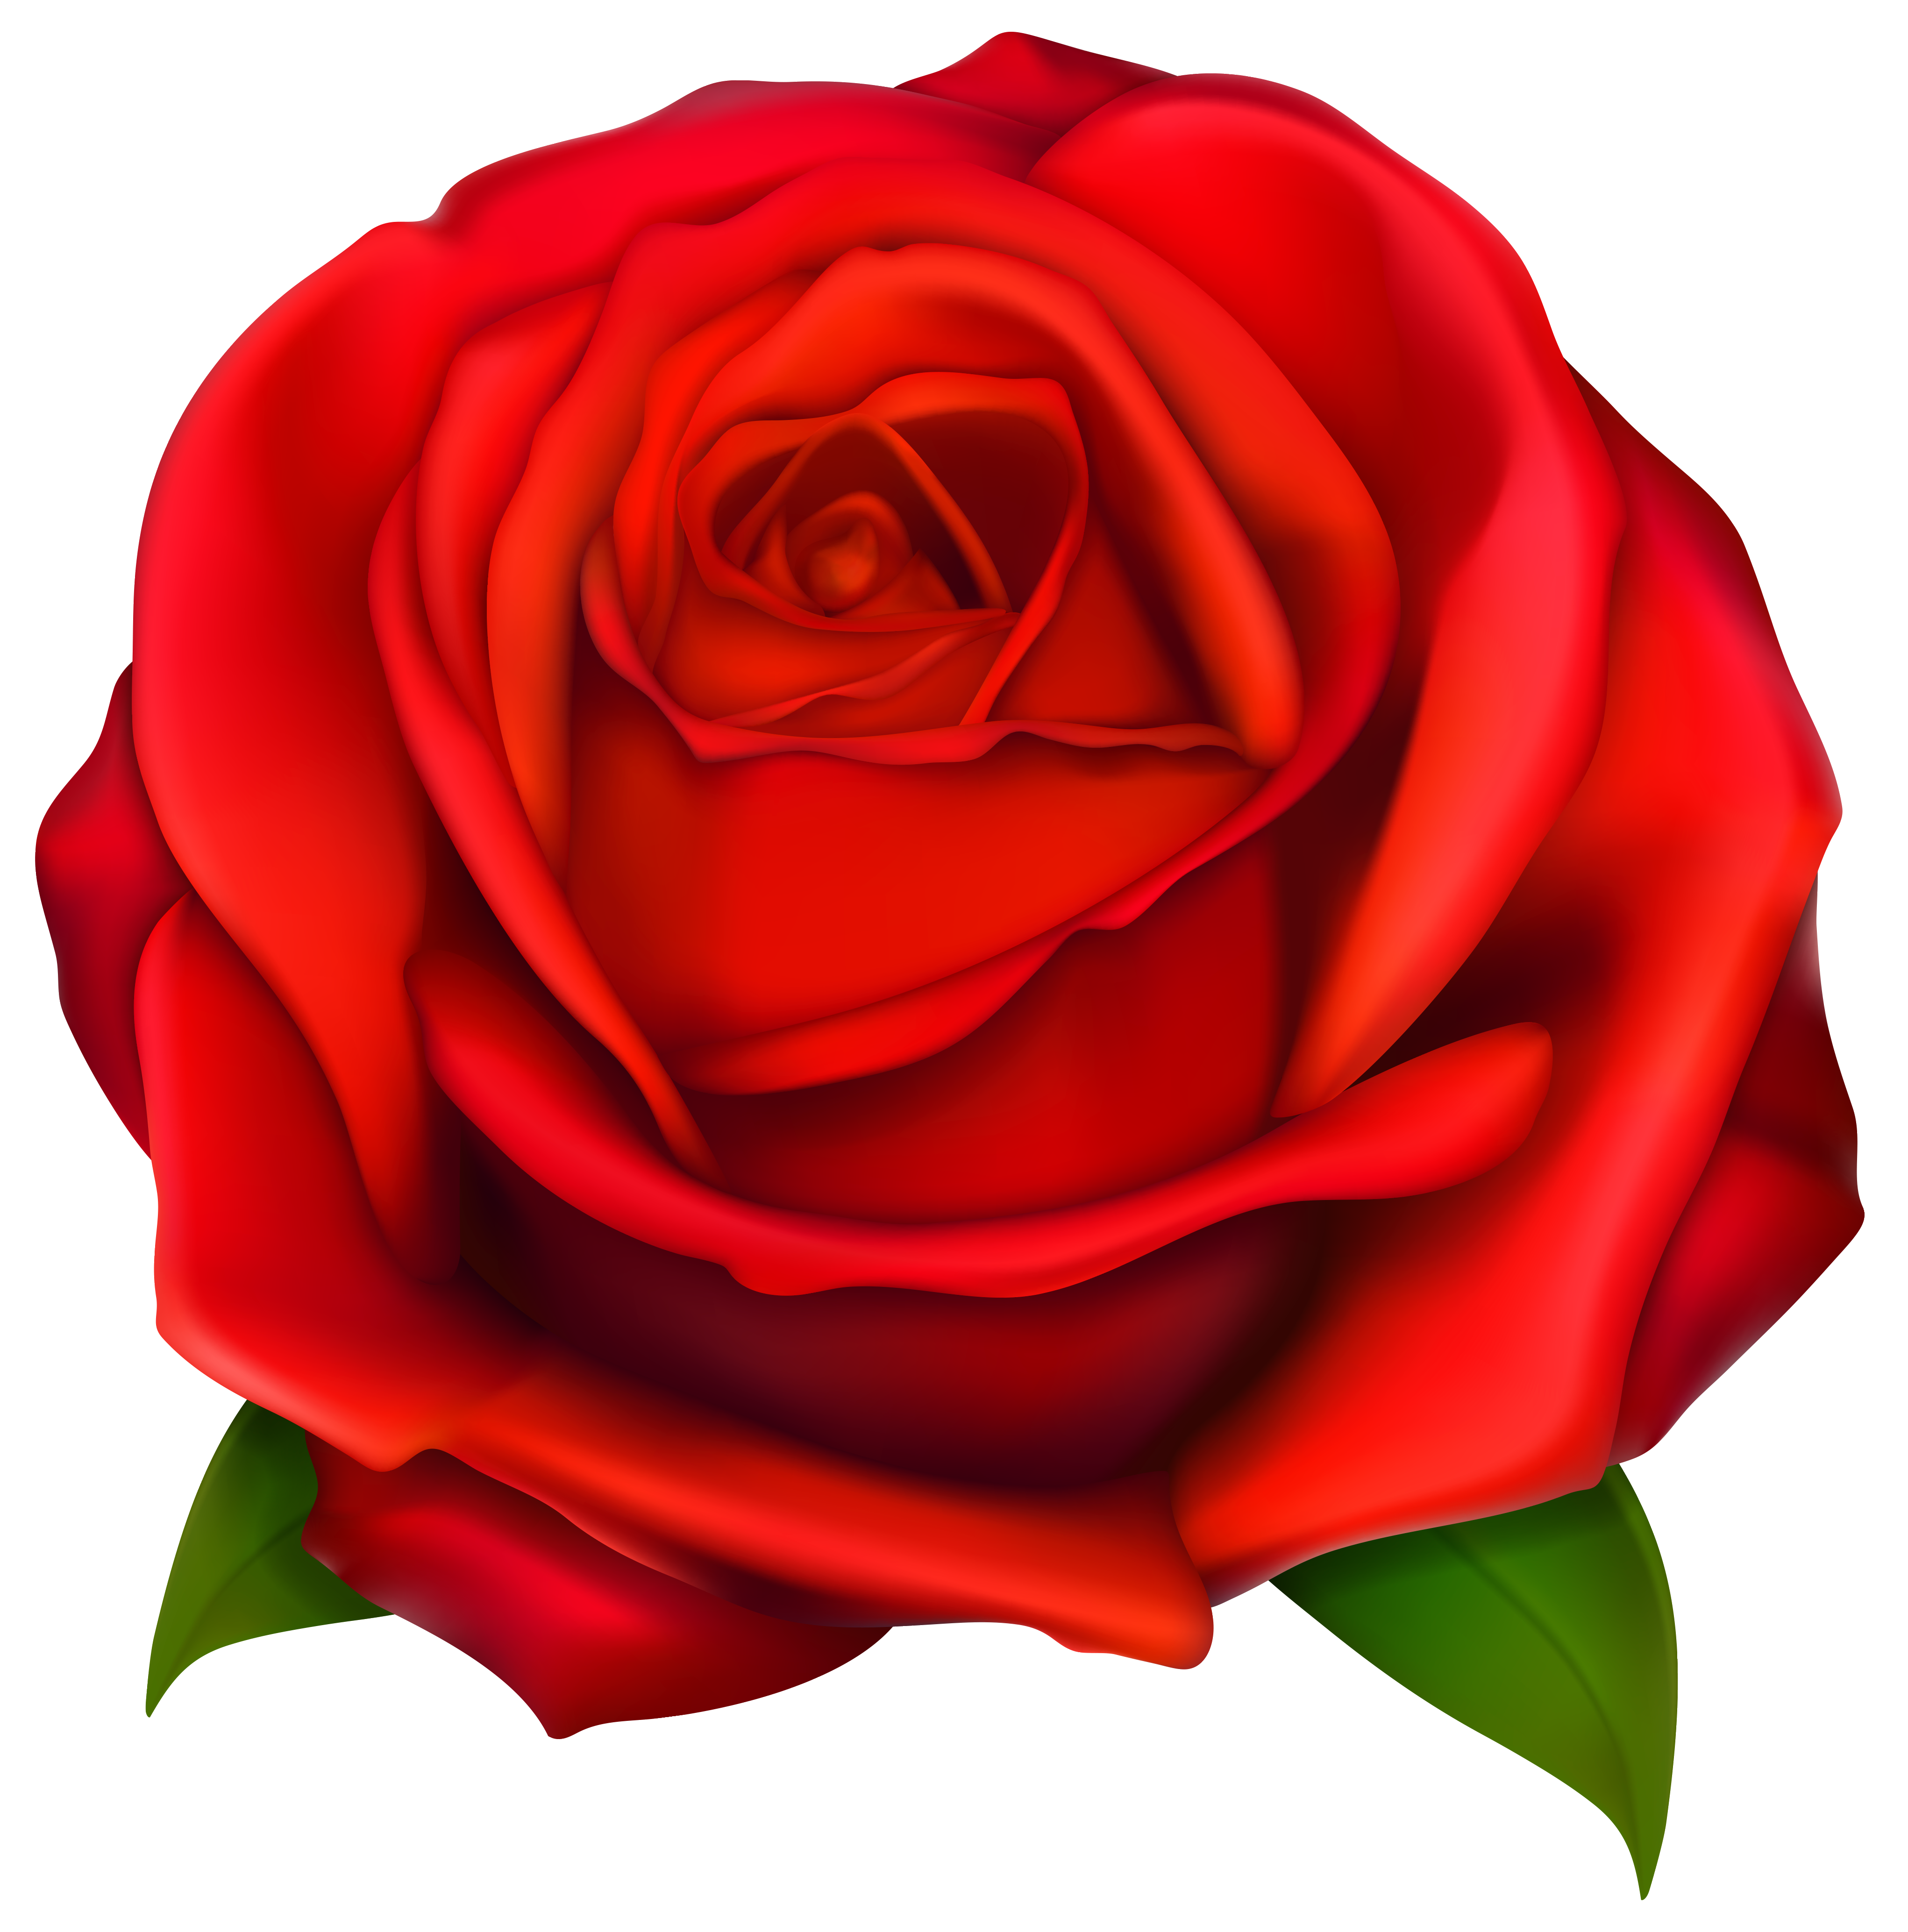 Roses free rose clipart publi - Red Rose Clipart